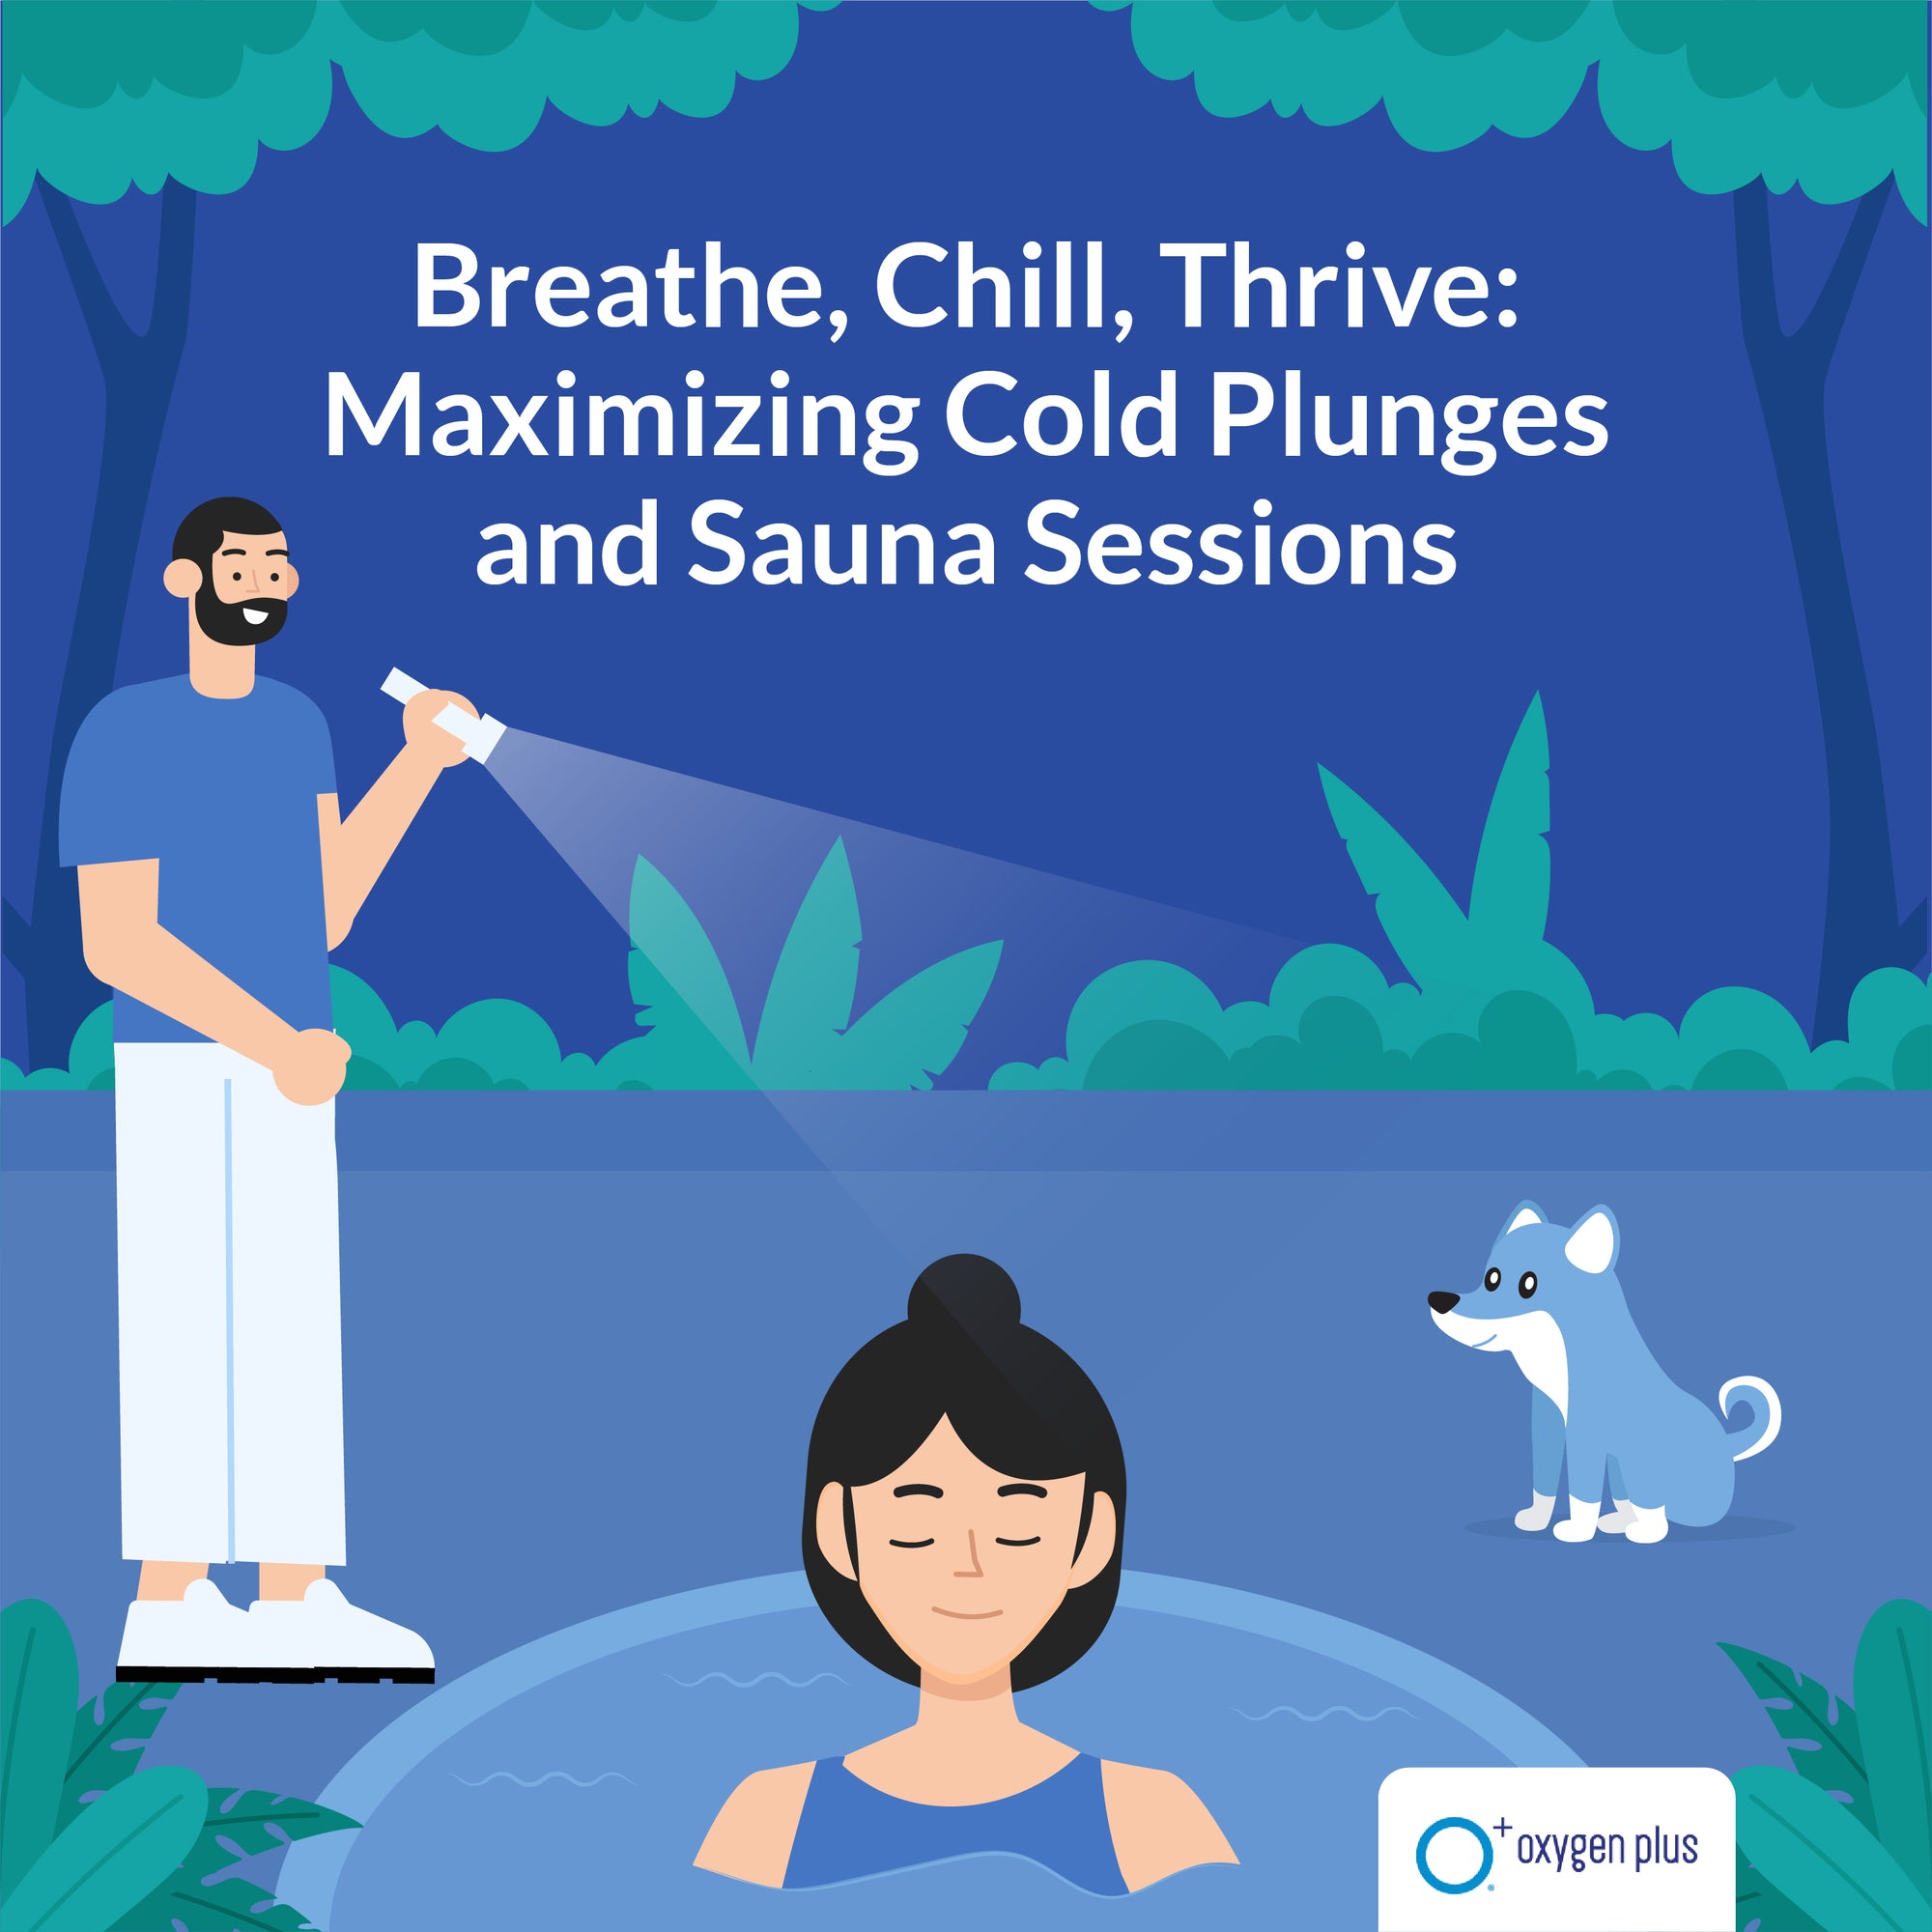 Breathe, Chill, Thrive: Maximizing the Benefits of Cold Plunges and Sauna Sessions